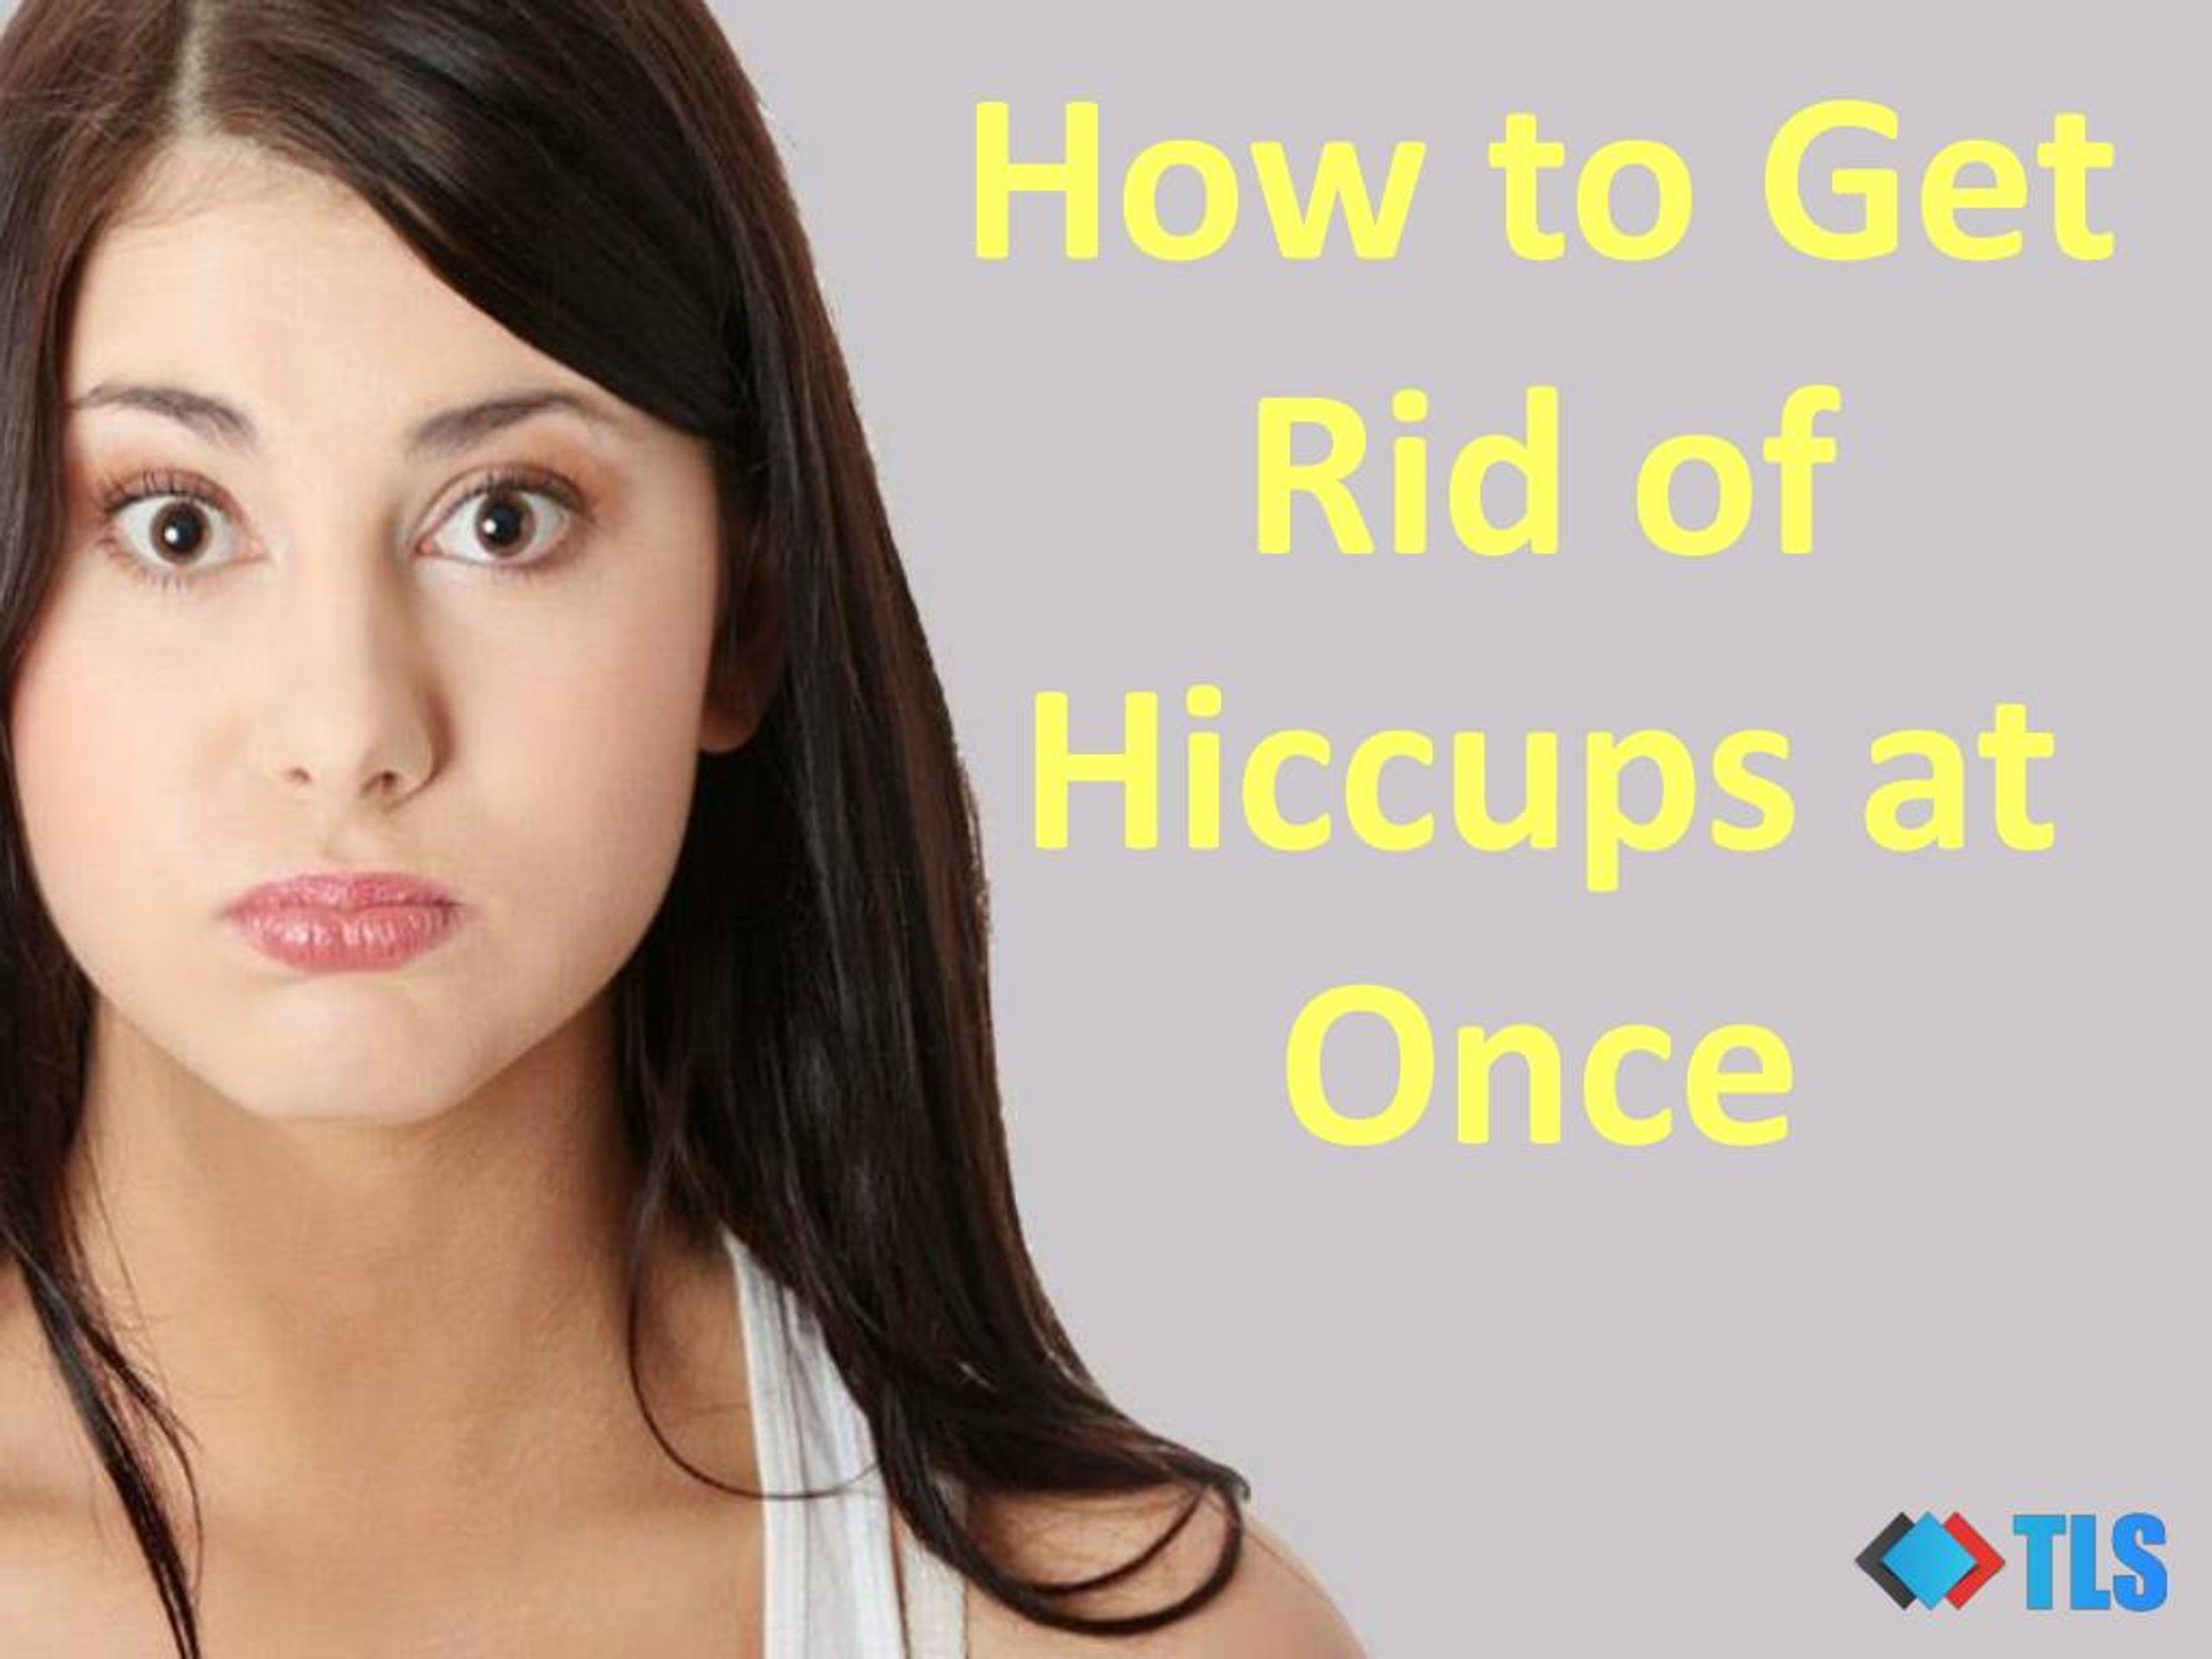 how to get rid of hiccups at once.